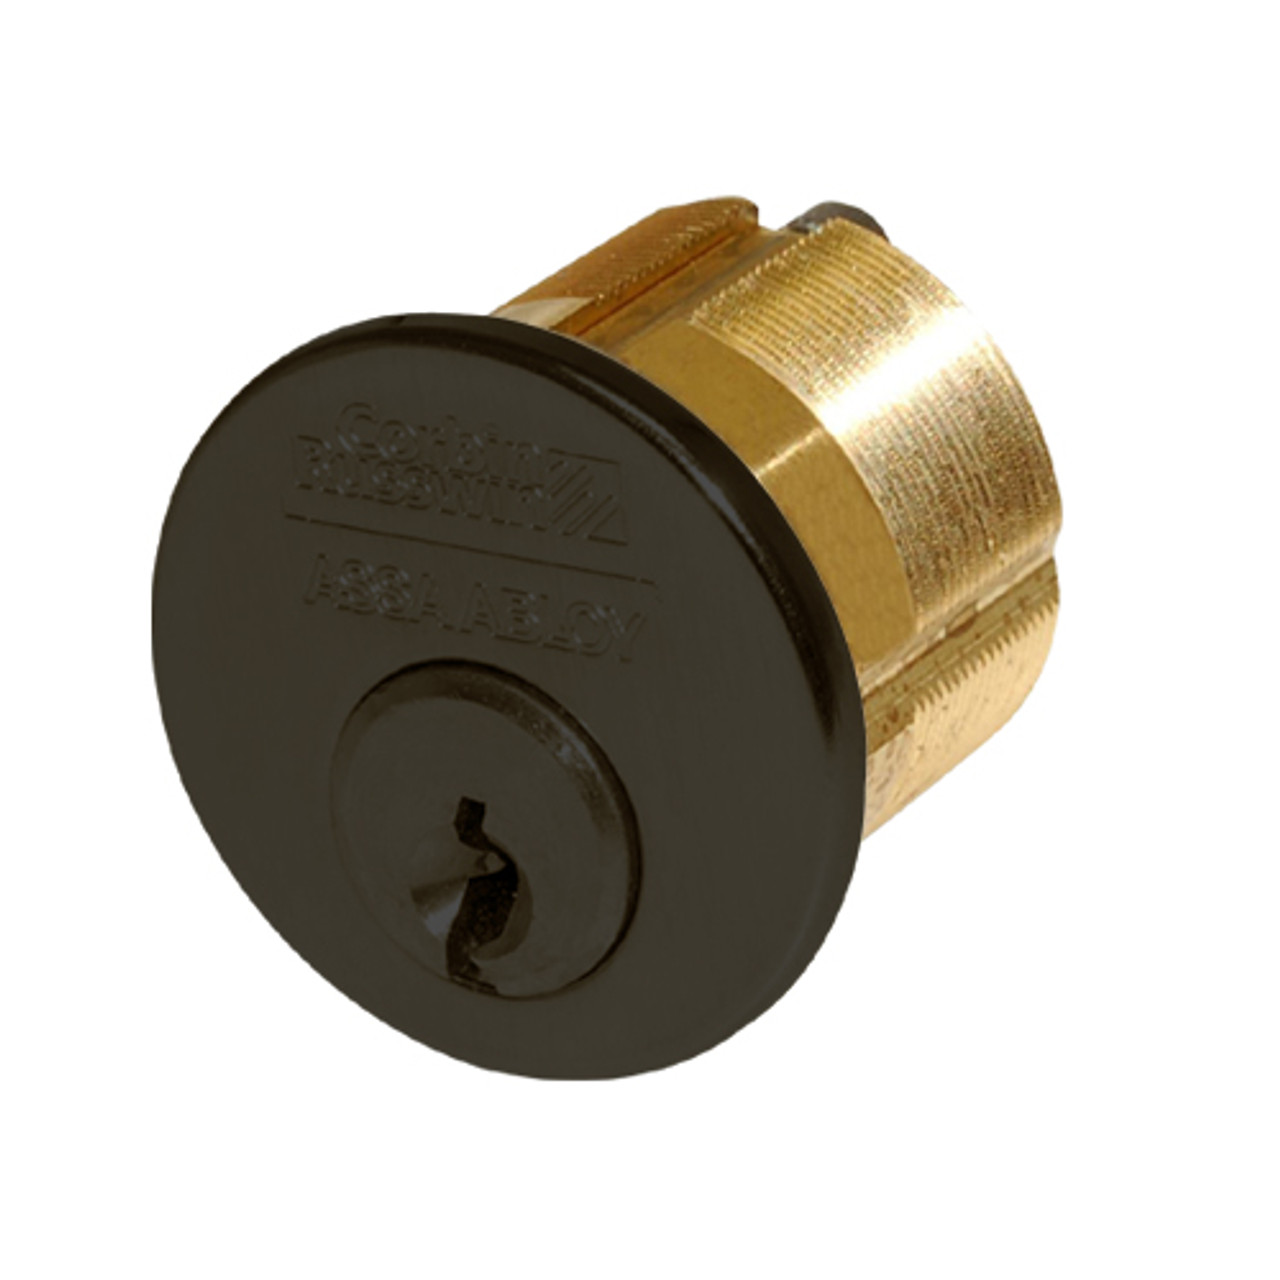 CR1000-138-A01-6-D1-613 Corbin Conventional Mortise Cylinder for Mortise Lock and DL3000 Deadlocks with Cloverleaf Cam in Oil Rubbed Bronze Finish